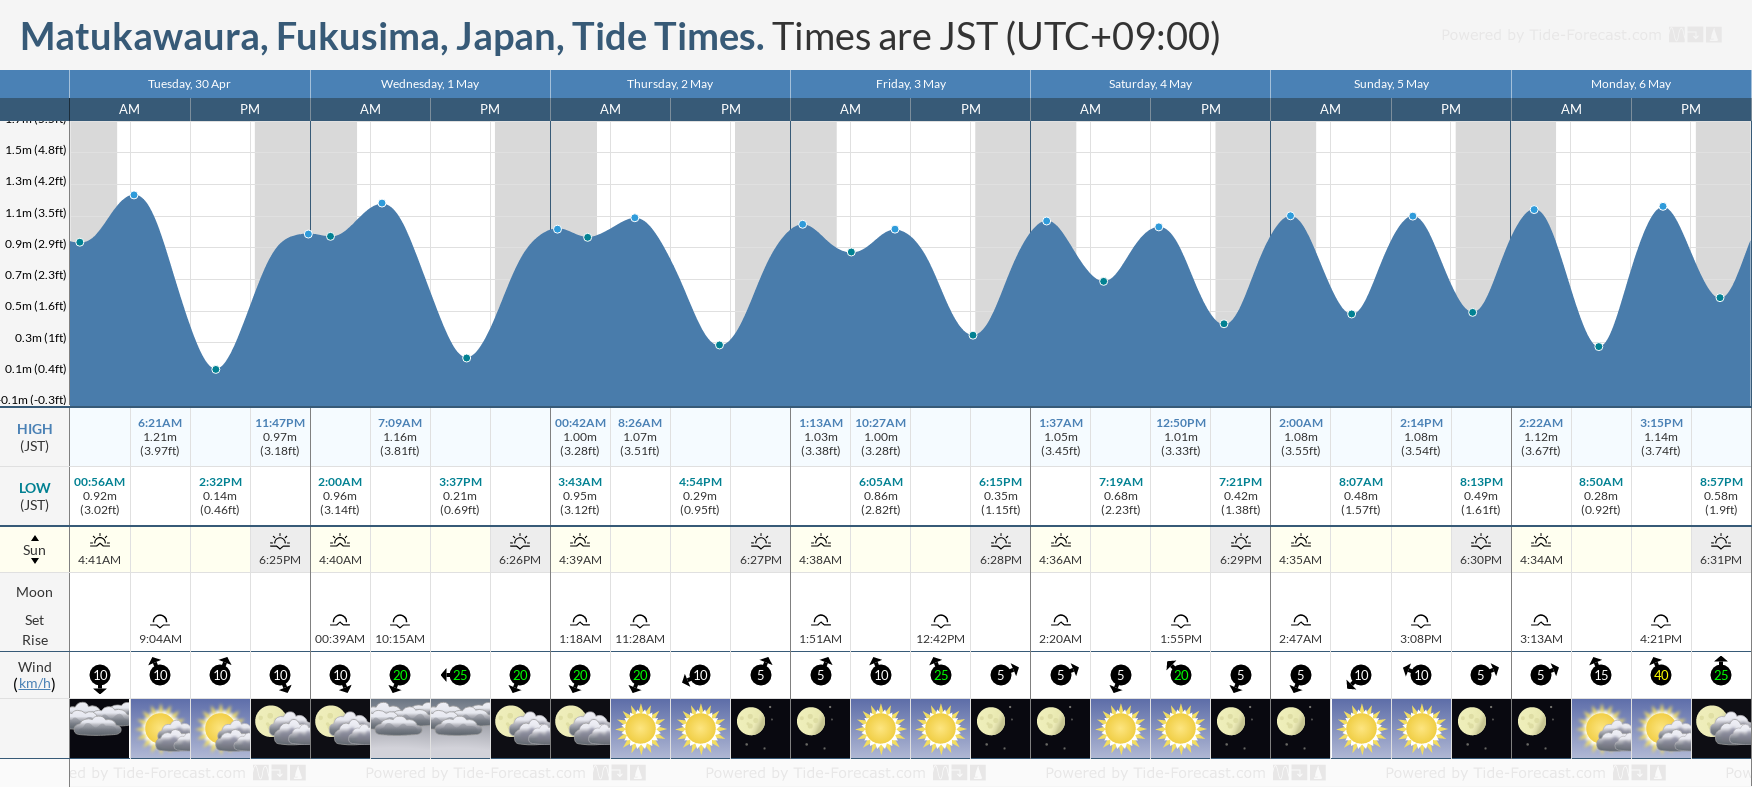 Matukawaura, Fukusima, Japan Tide Chart including high and low tide times for the next 7 days